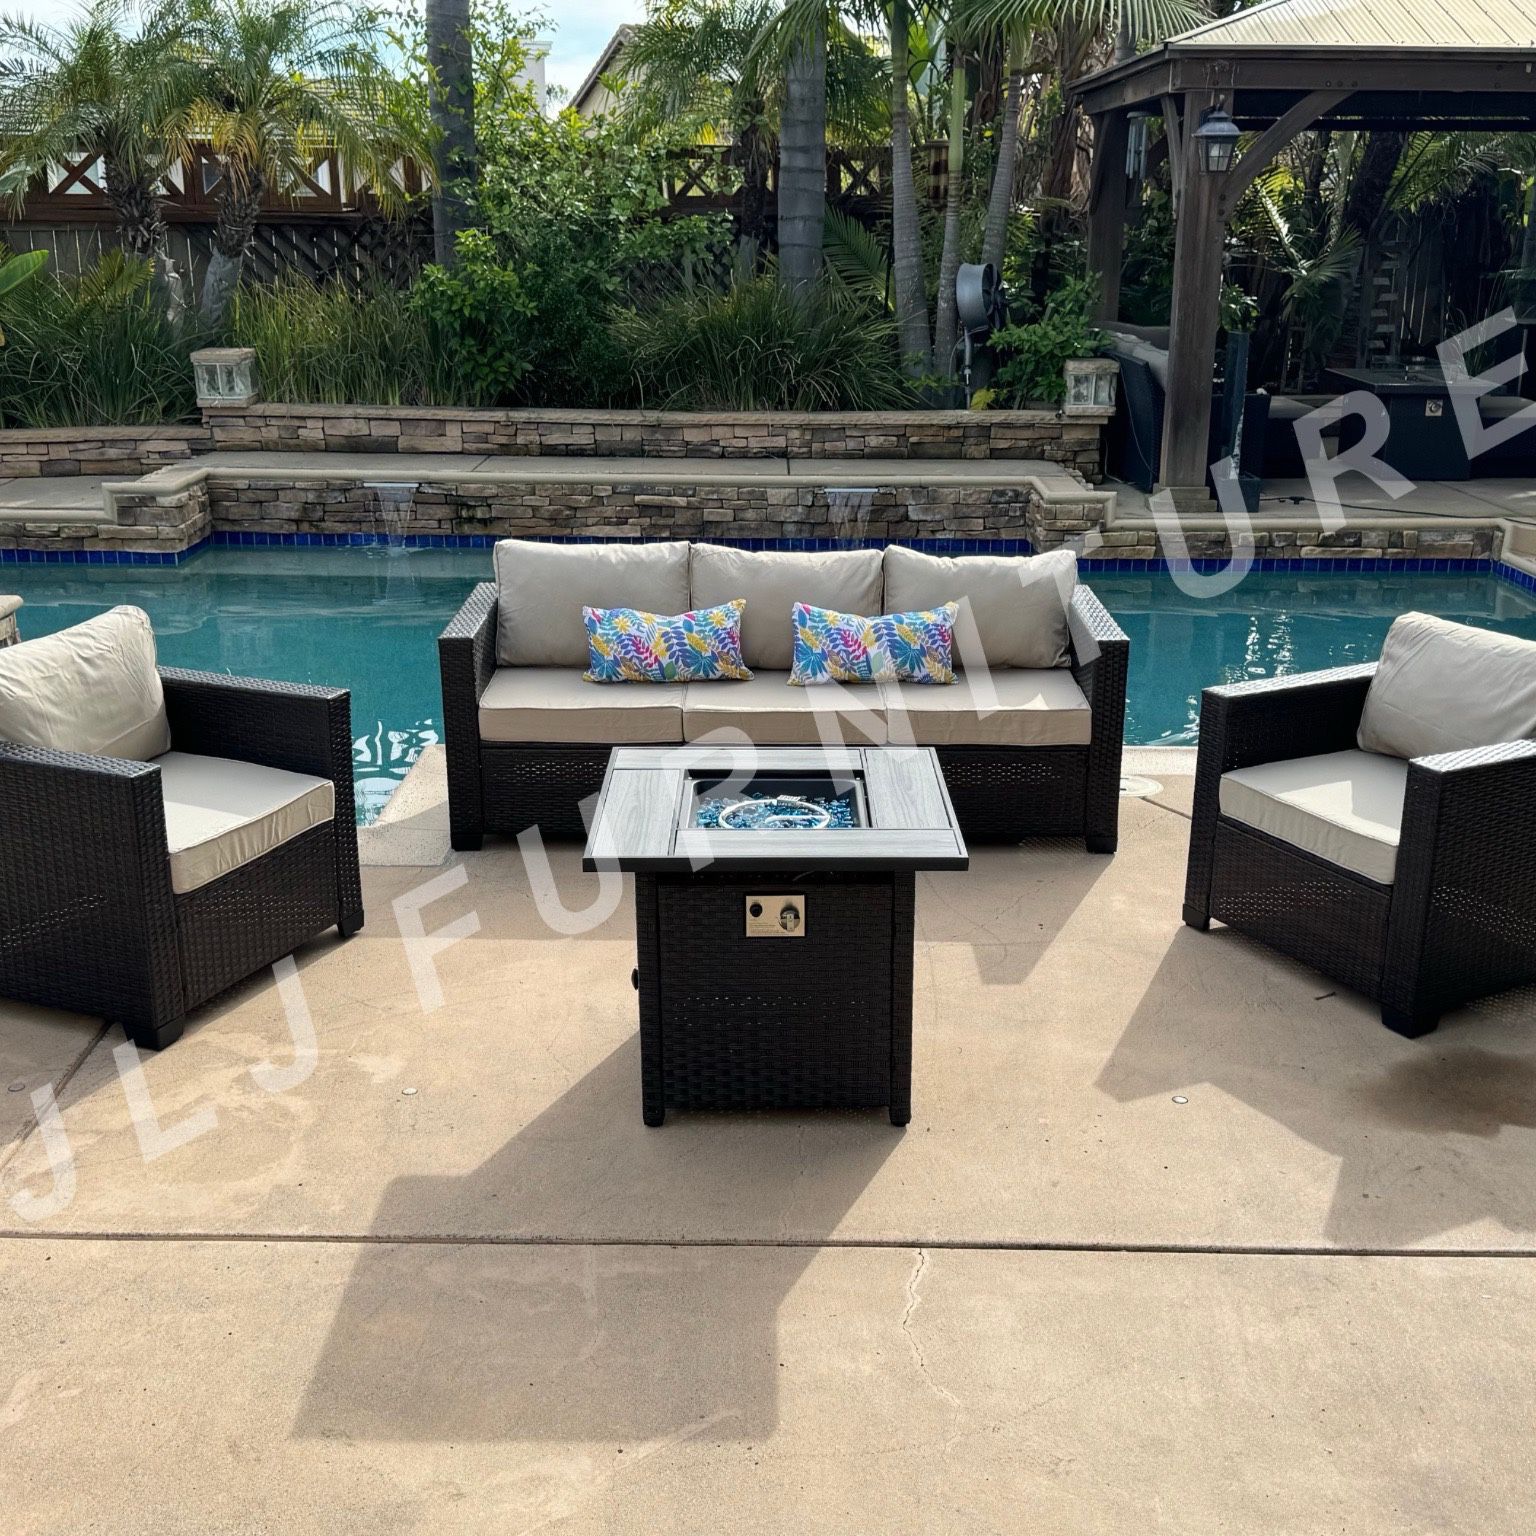 NEW🔥Outdoor Patio Furniture 4 Pc Brown Wicker Beige Cushions with 30" Firepit ASSEMBLED